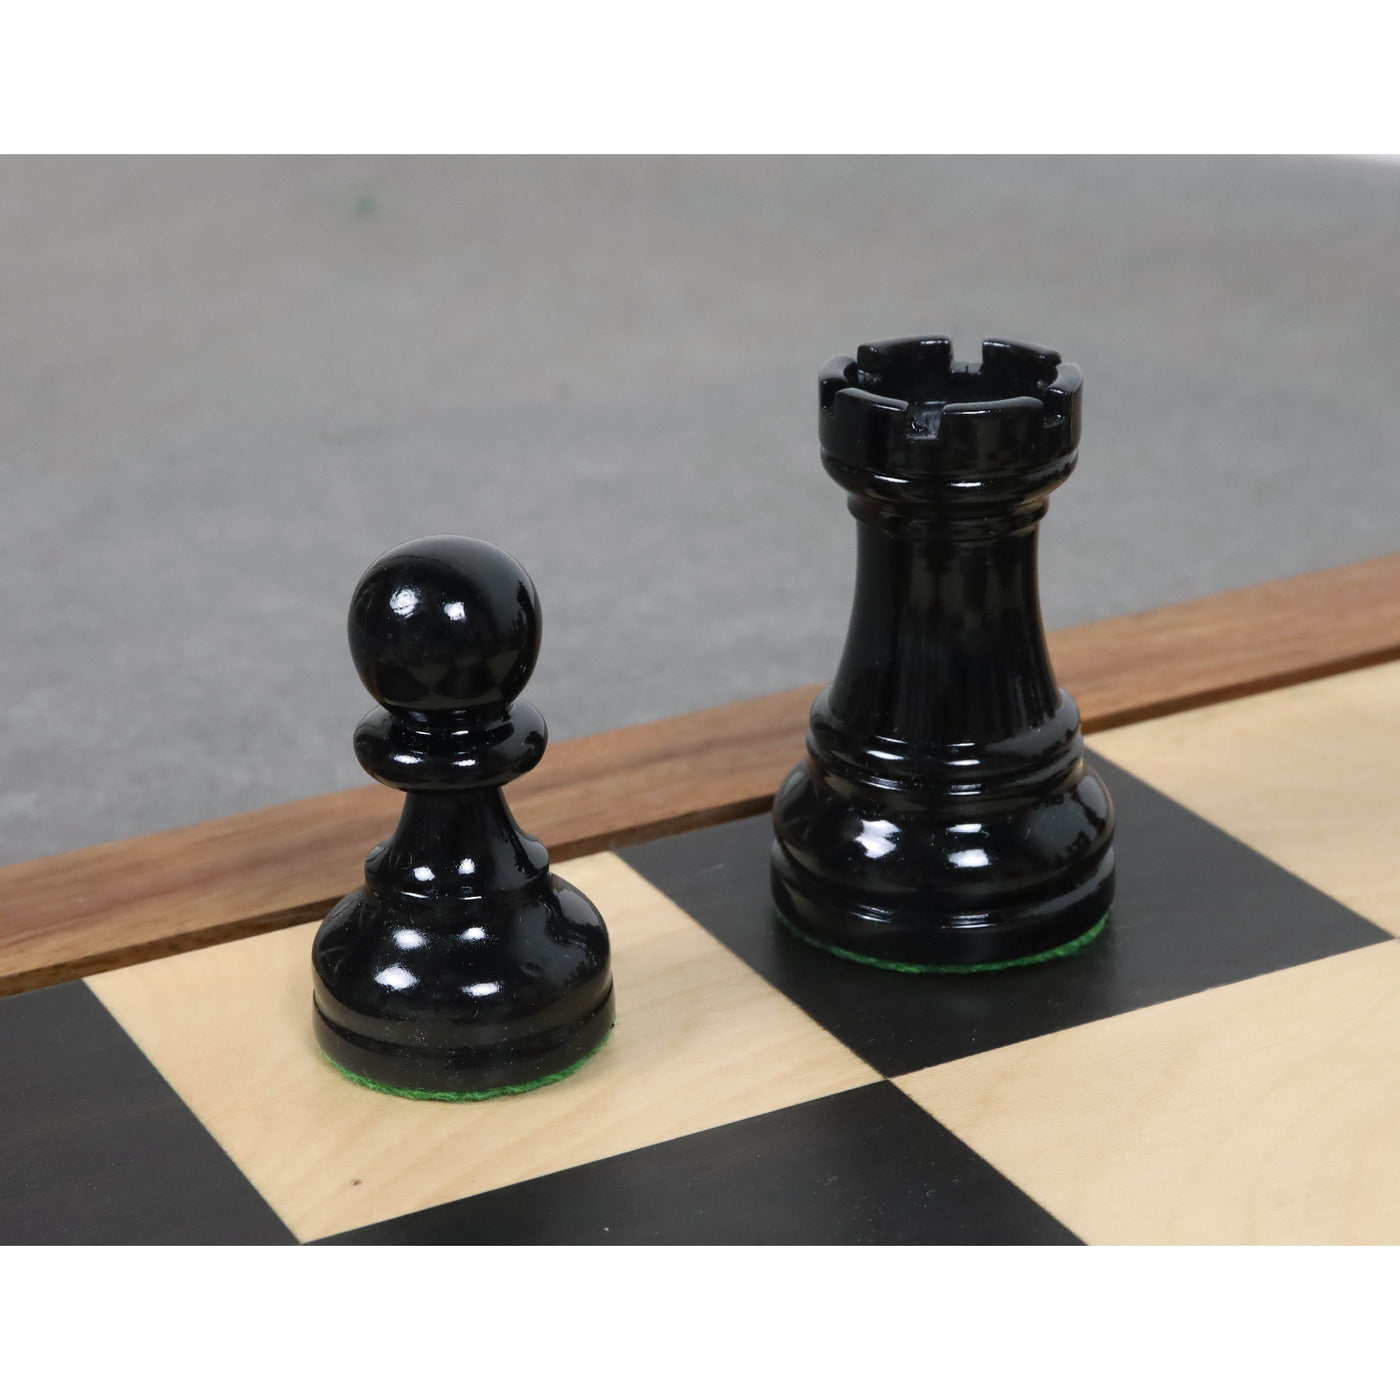 Black & Ivory White Painted Staunton Chess Pieces only set